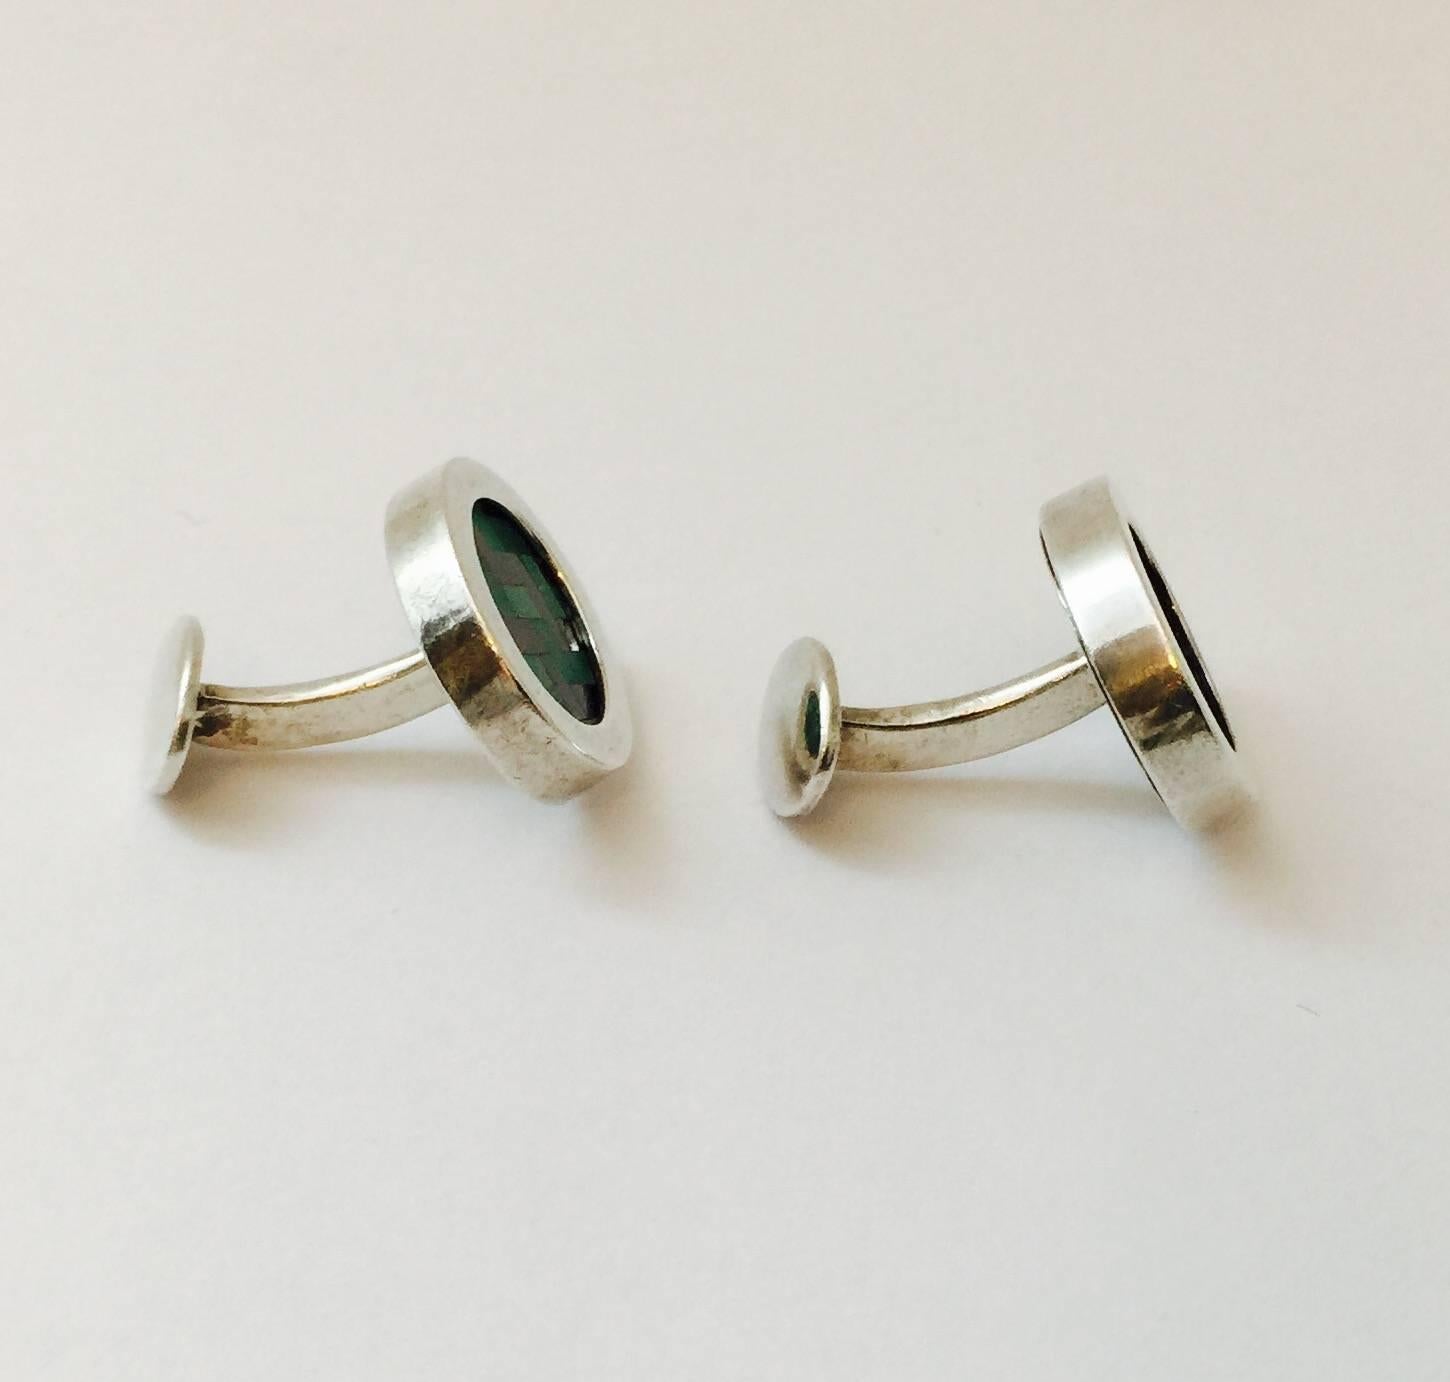 These elegant vintage Tiffany cufflinks are in a substantial sterling silver oval shape, with chevron tiles of enamel in the centre in shades of green.  Stamped Tiffany and Sterling Silver.  Finish off French Cuffs in style. Suitable for a woman's